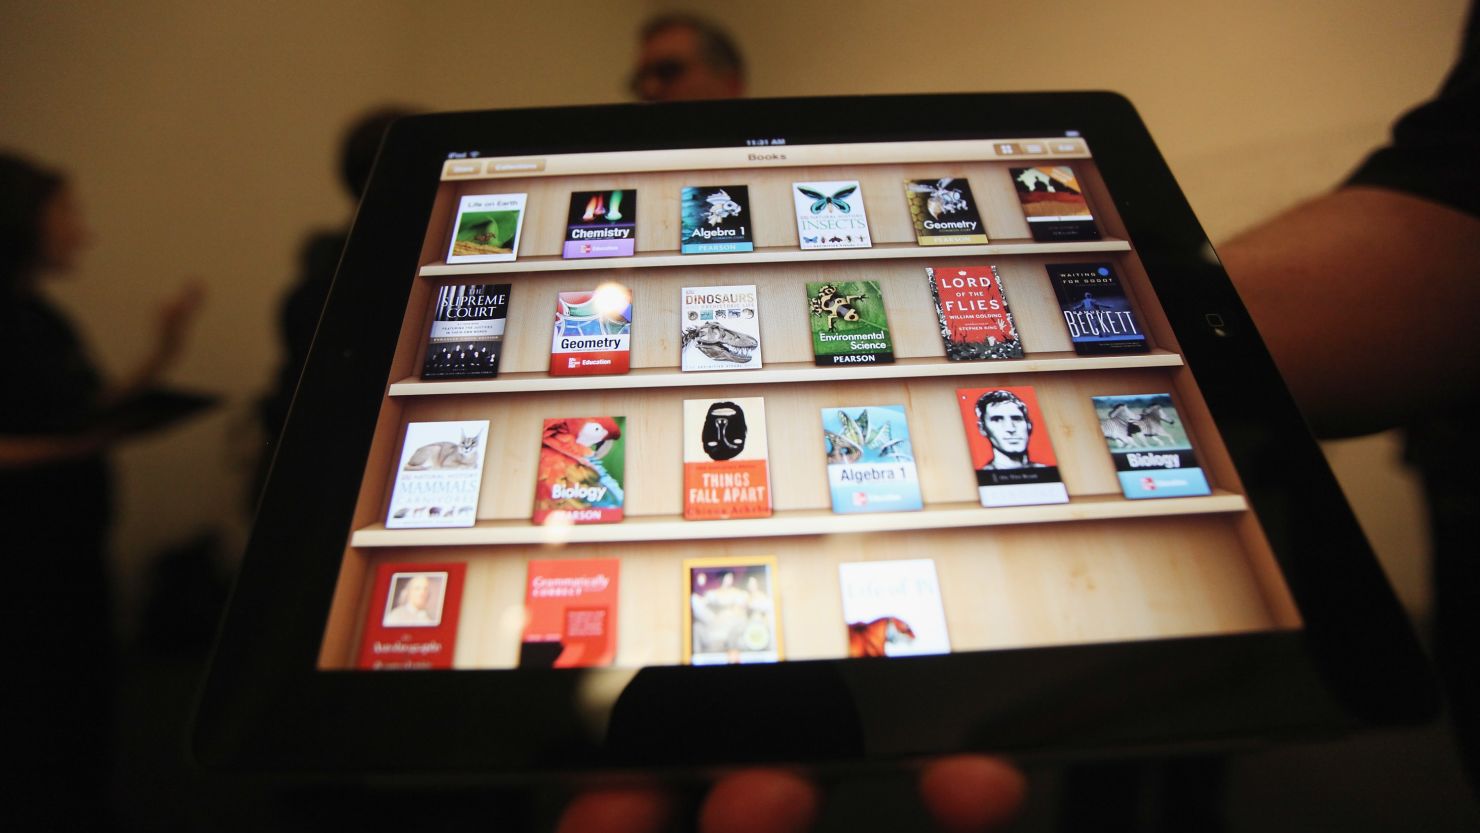 An Apple event demonstrates its iBooks 2 app on an iPad at New York's Guggenheim Museum in January.